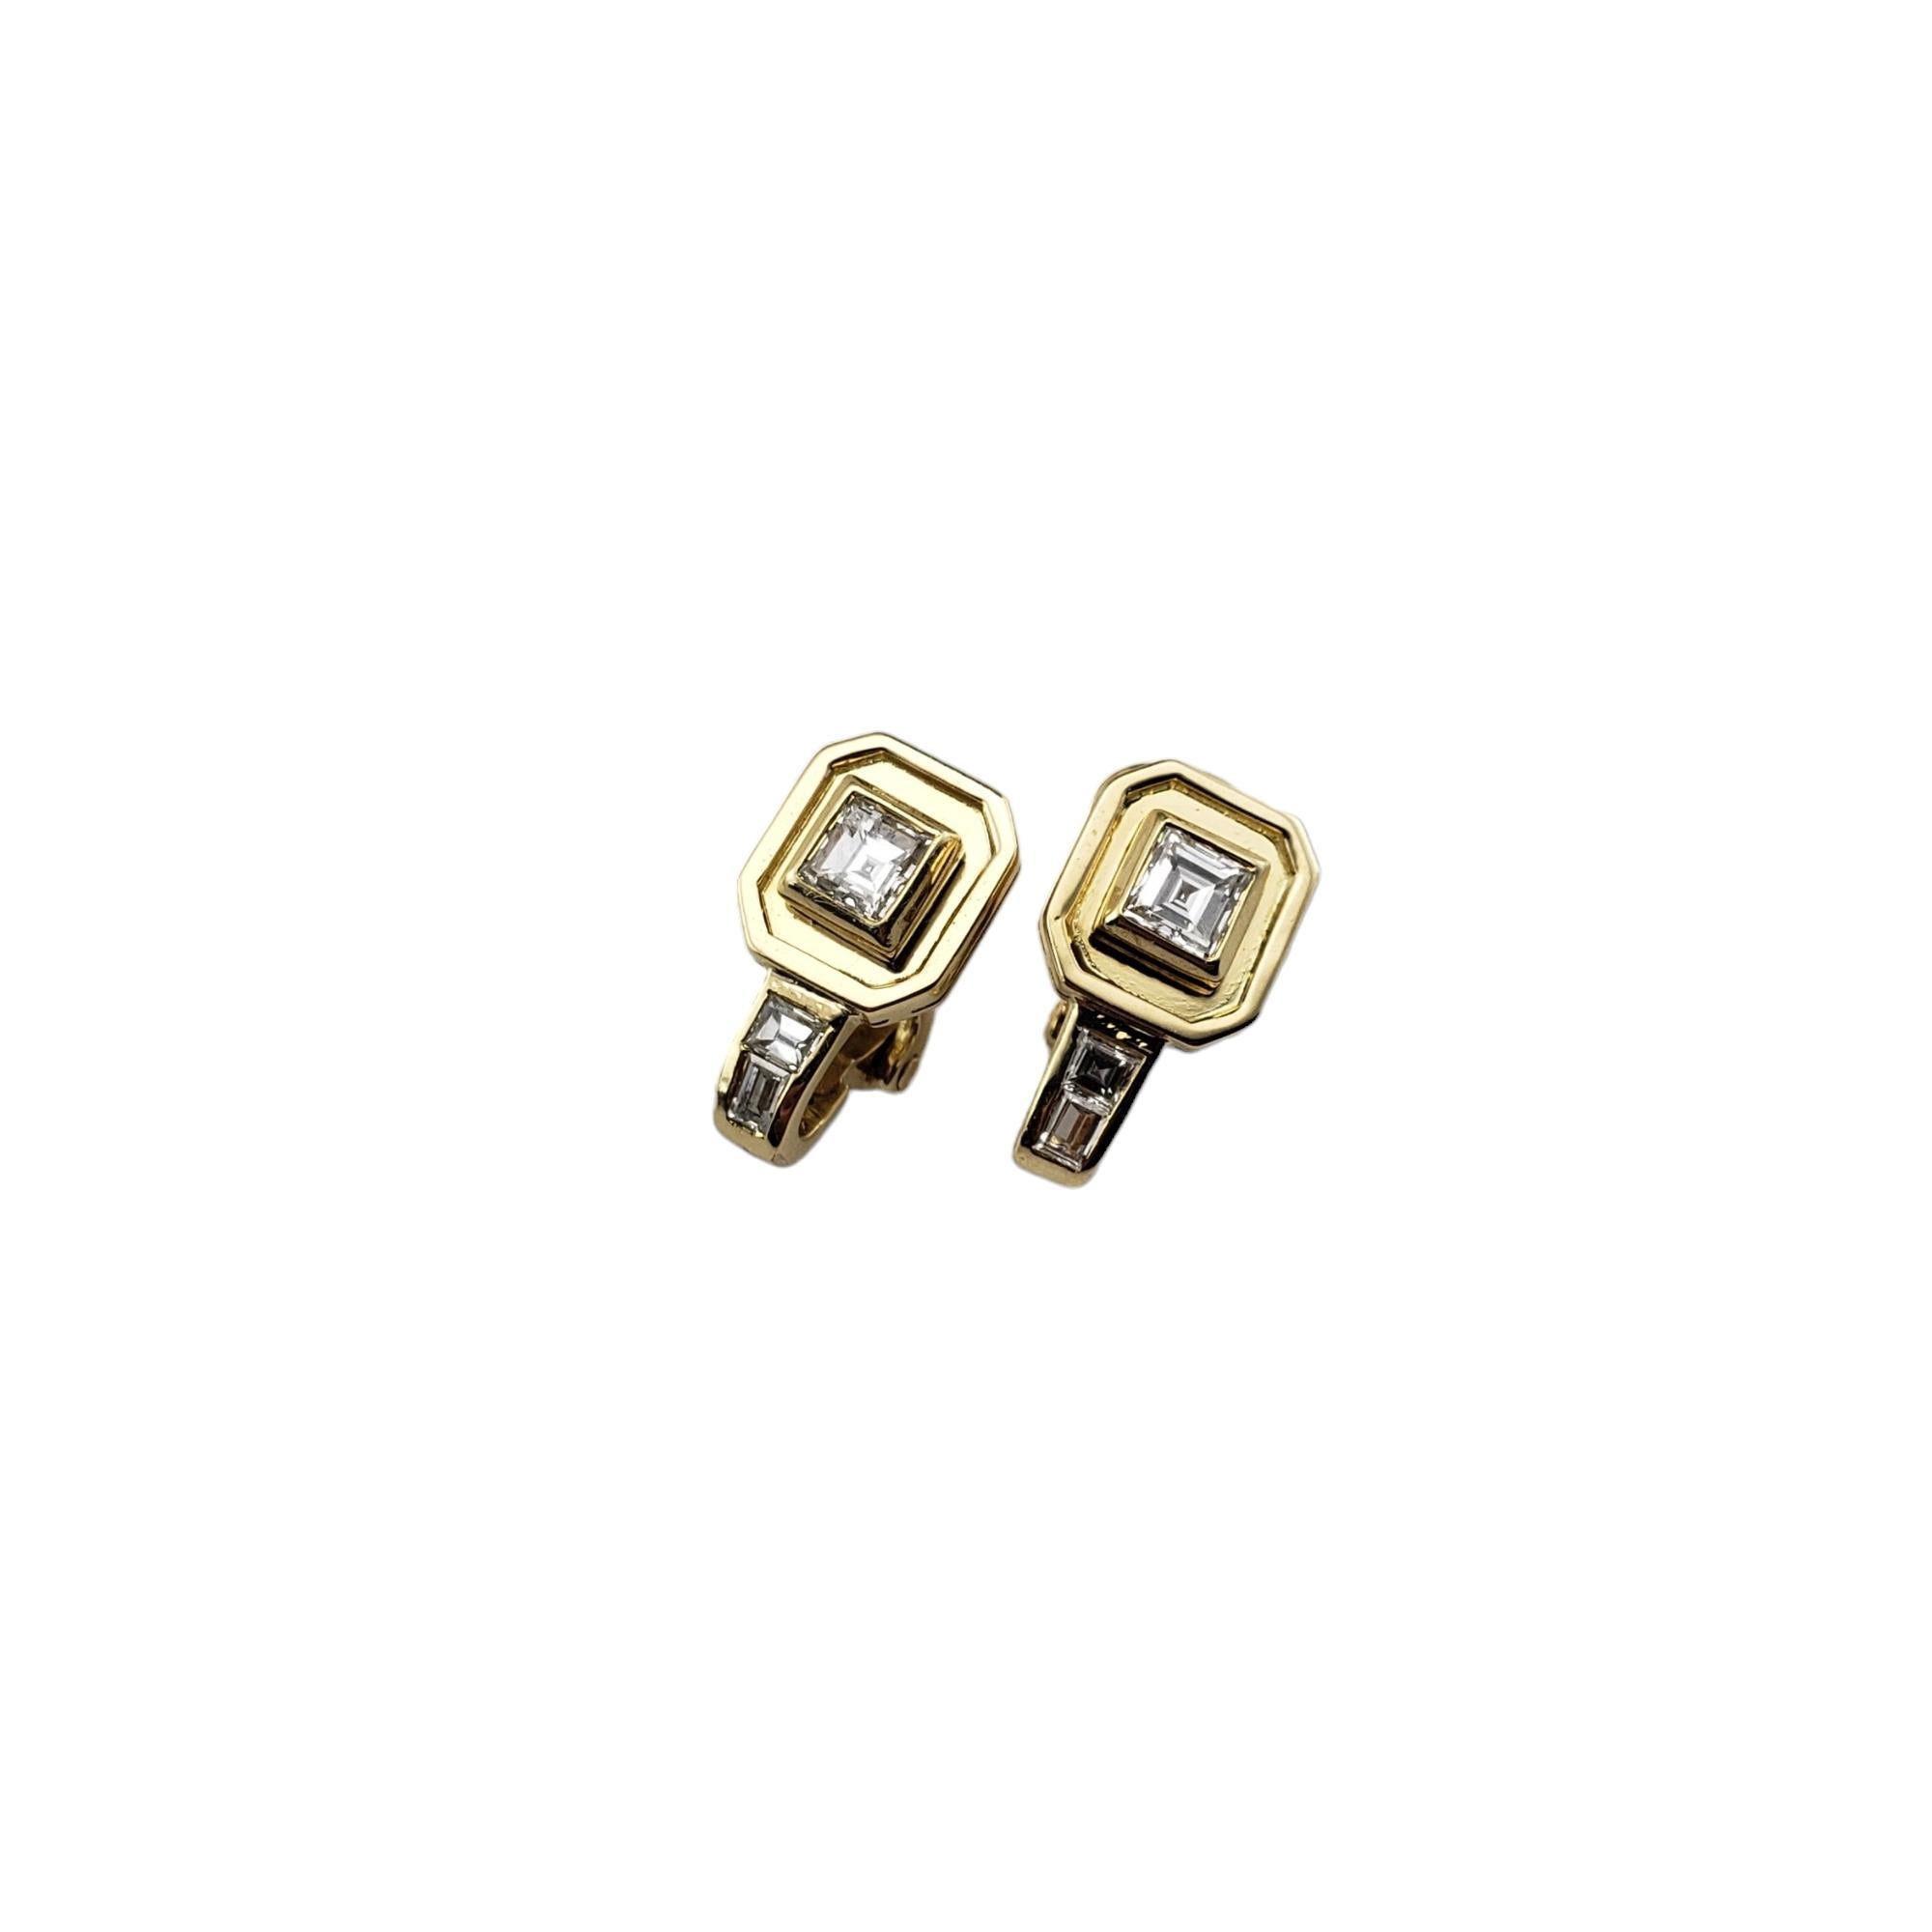 Vintage 18 Karat Yellow Gold and Diamond Clip On Earrings-

These sparkling clip on earrings each feature one princess cut diamond (.25 ct. each) and two baguette cut diamonds set in classic 18K yellow gold.

Approximate total diamond weight:  .66